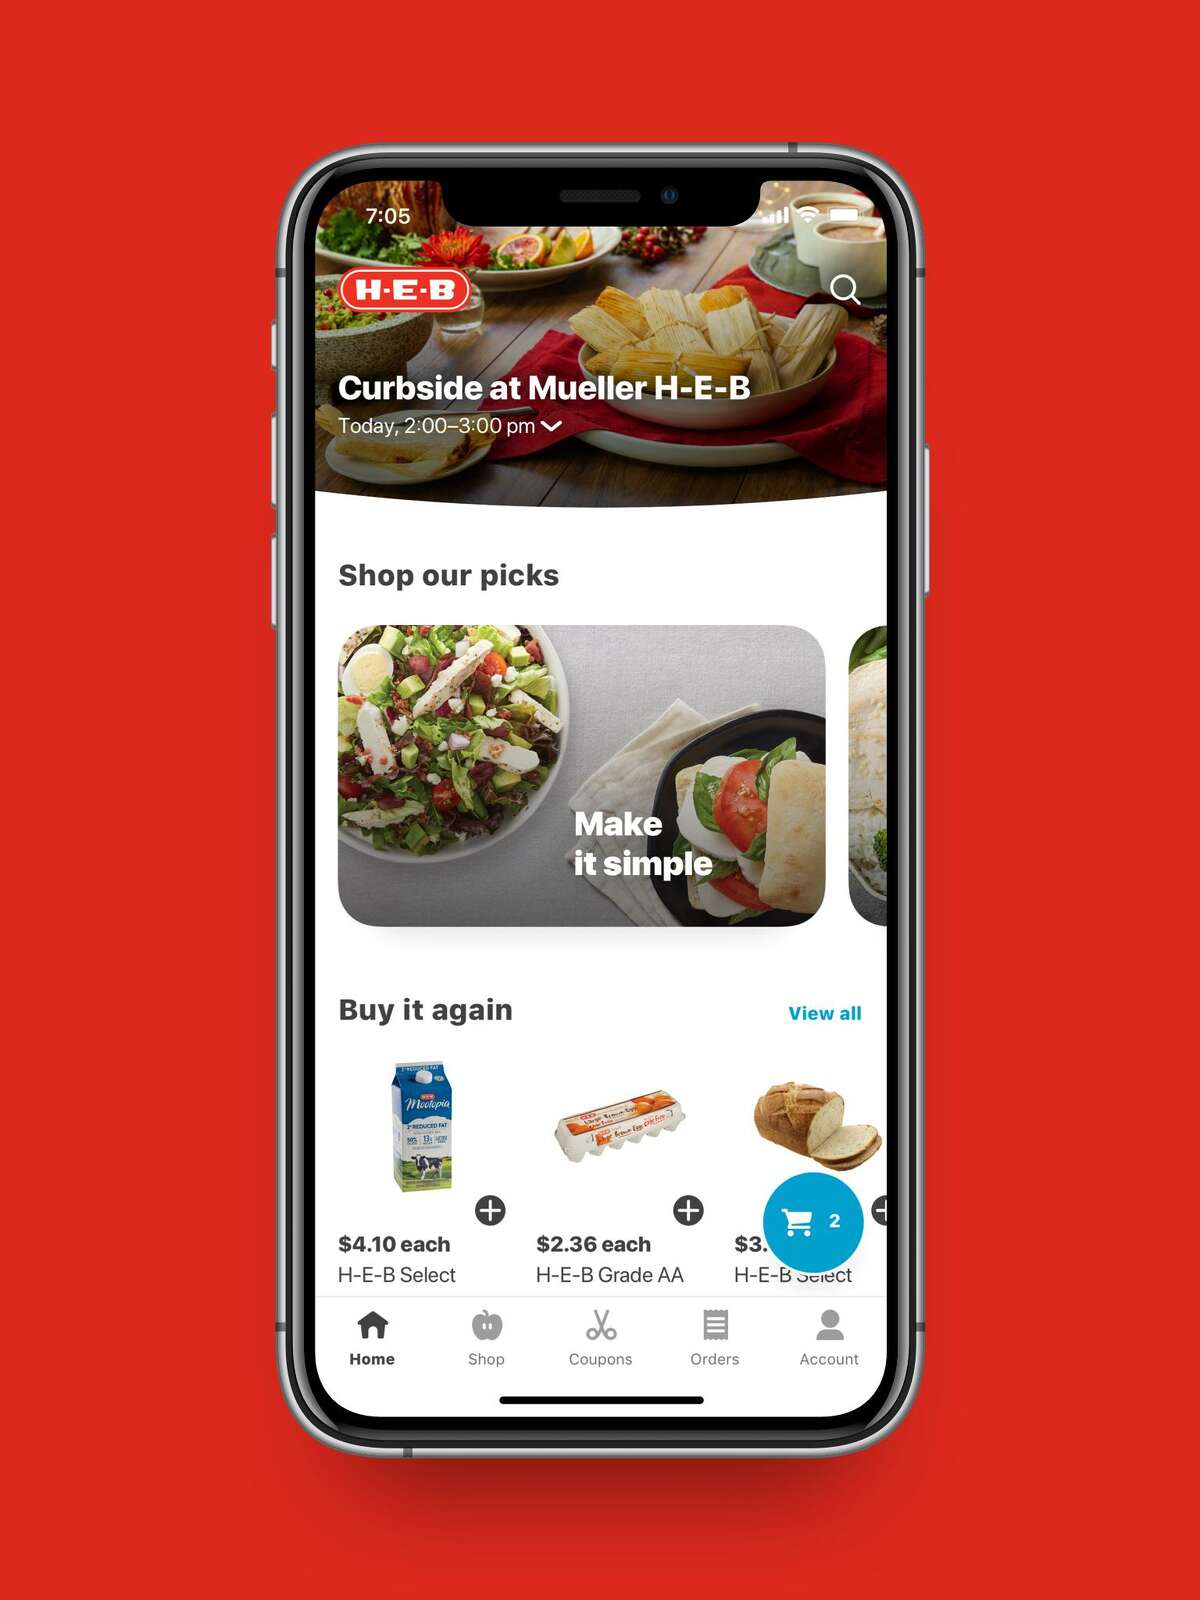 H-E-B has launched its new app, My H-E-B, available in the Apple App Store and Google Play.